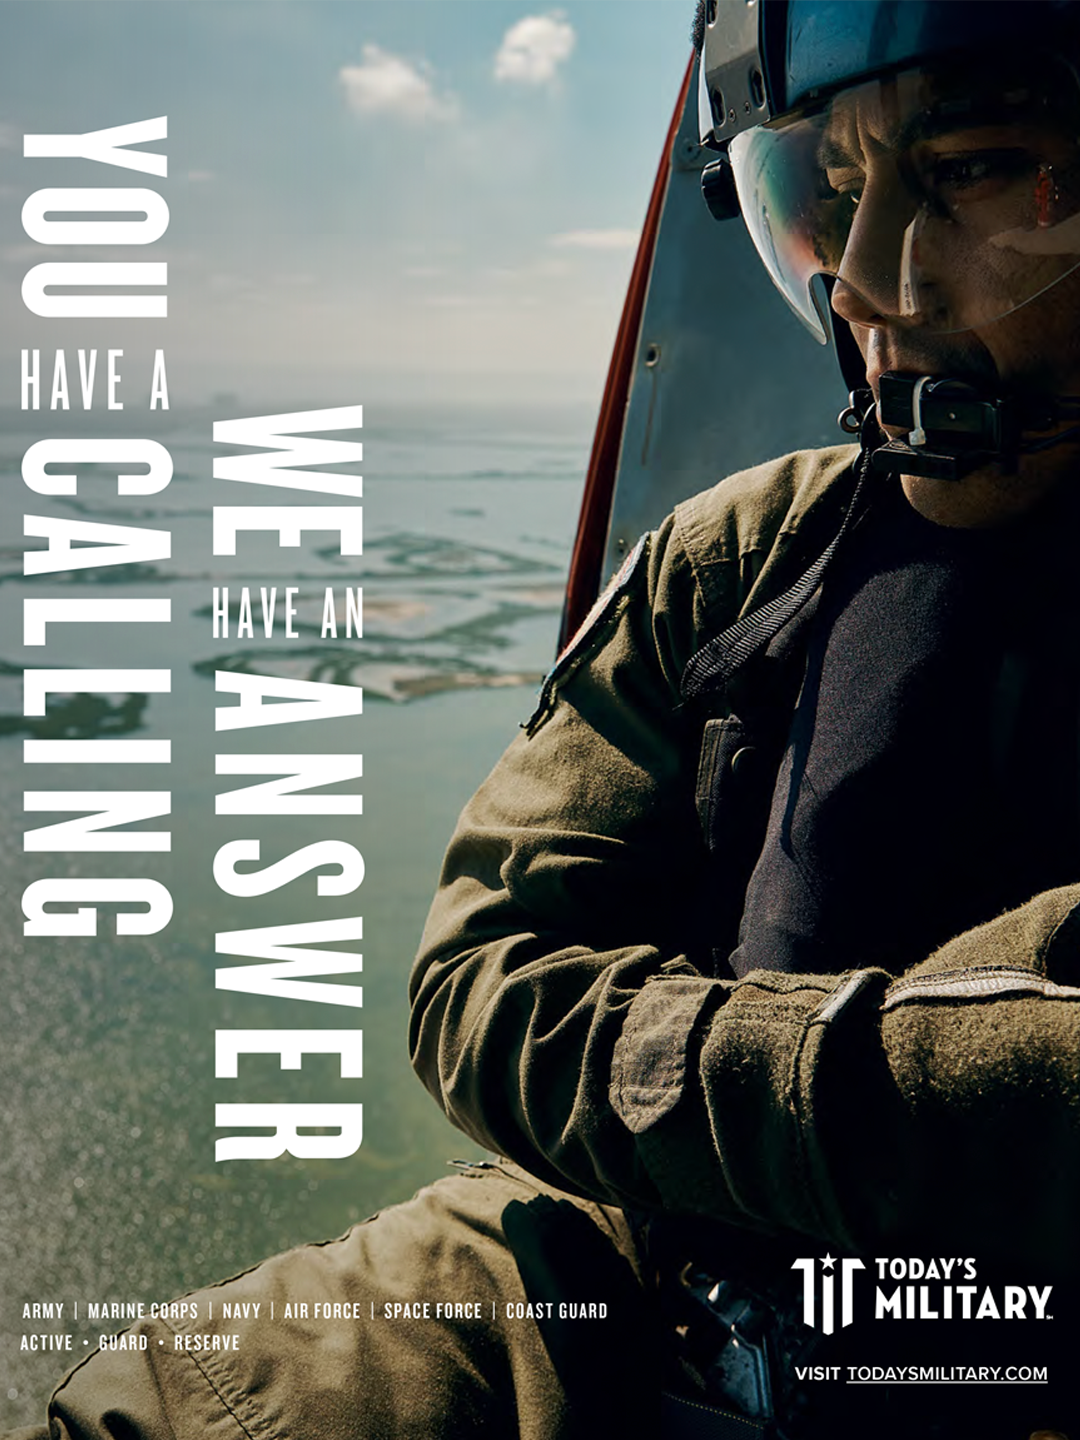 Print ad with military member in helicopter